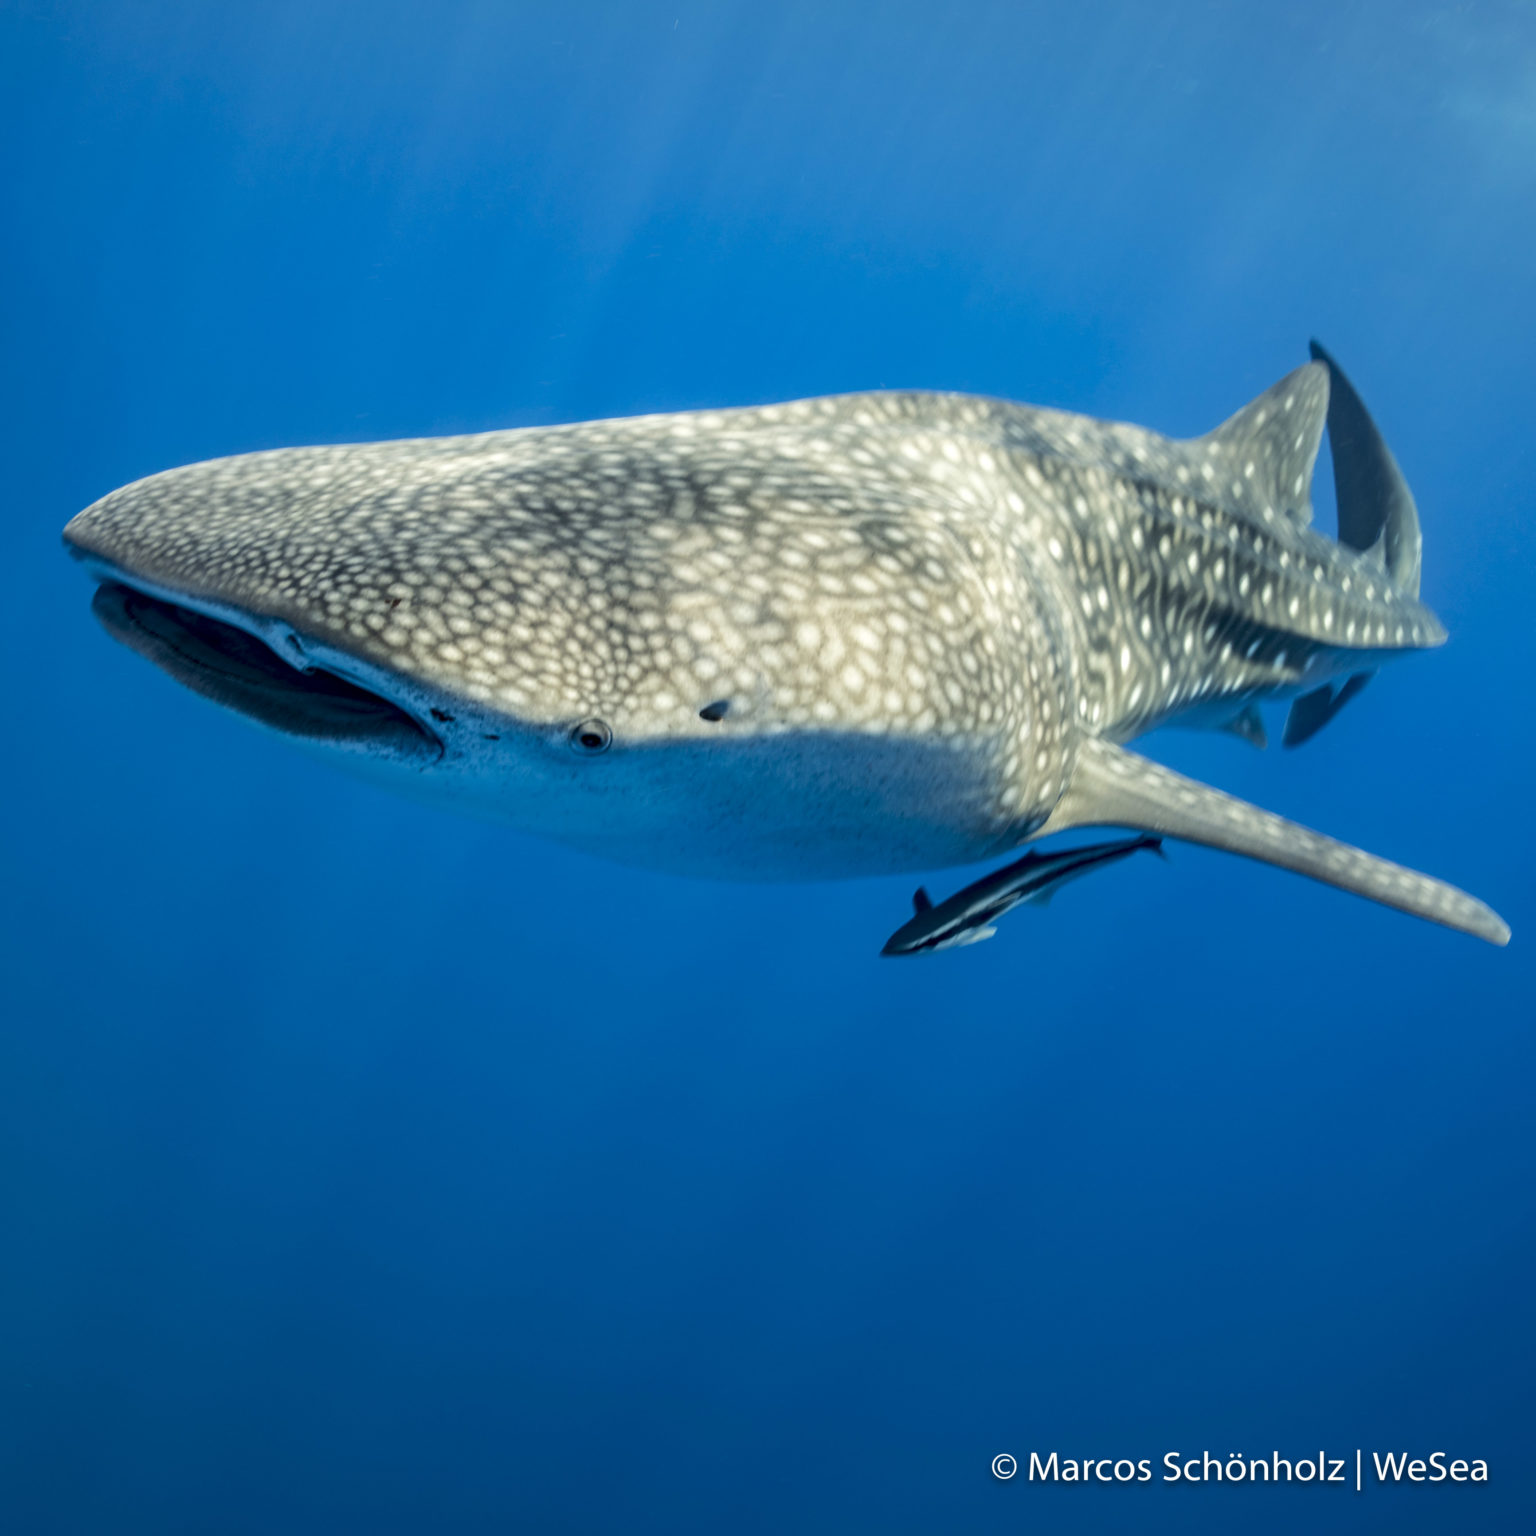 3. Copy of 19-08-10 Whale Shark WS IG 005